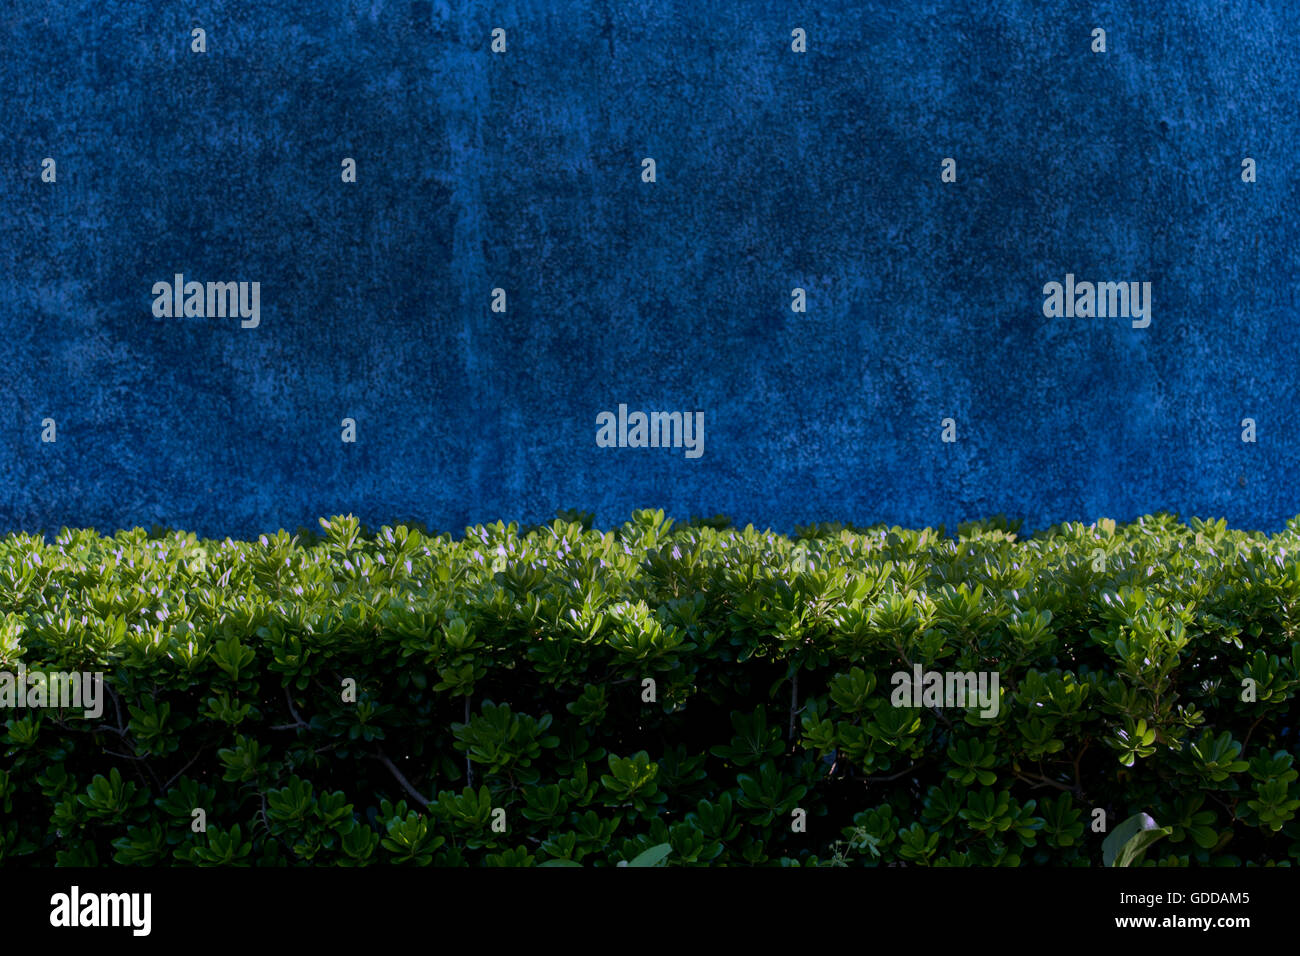 Beautiful Textured Blue Wall with Green Plants in Front Typographic Display Design Space Colorful Vacation Riviera Maya, Mexico Stock Photo